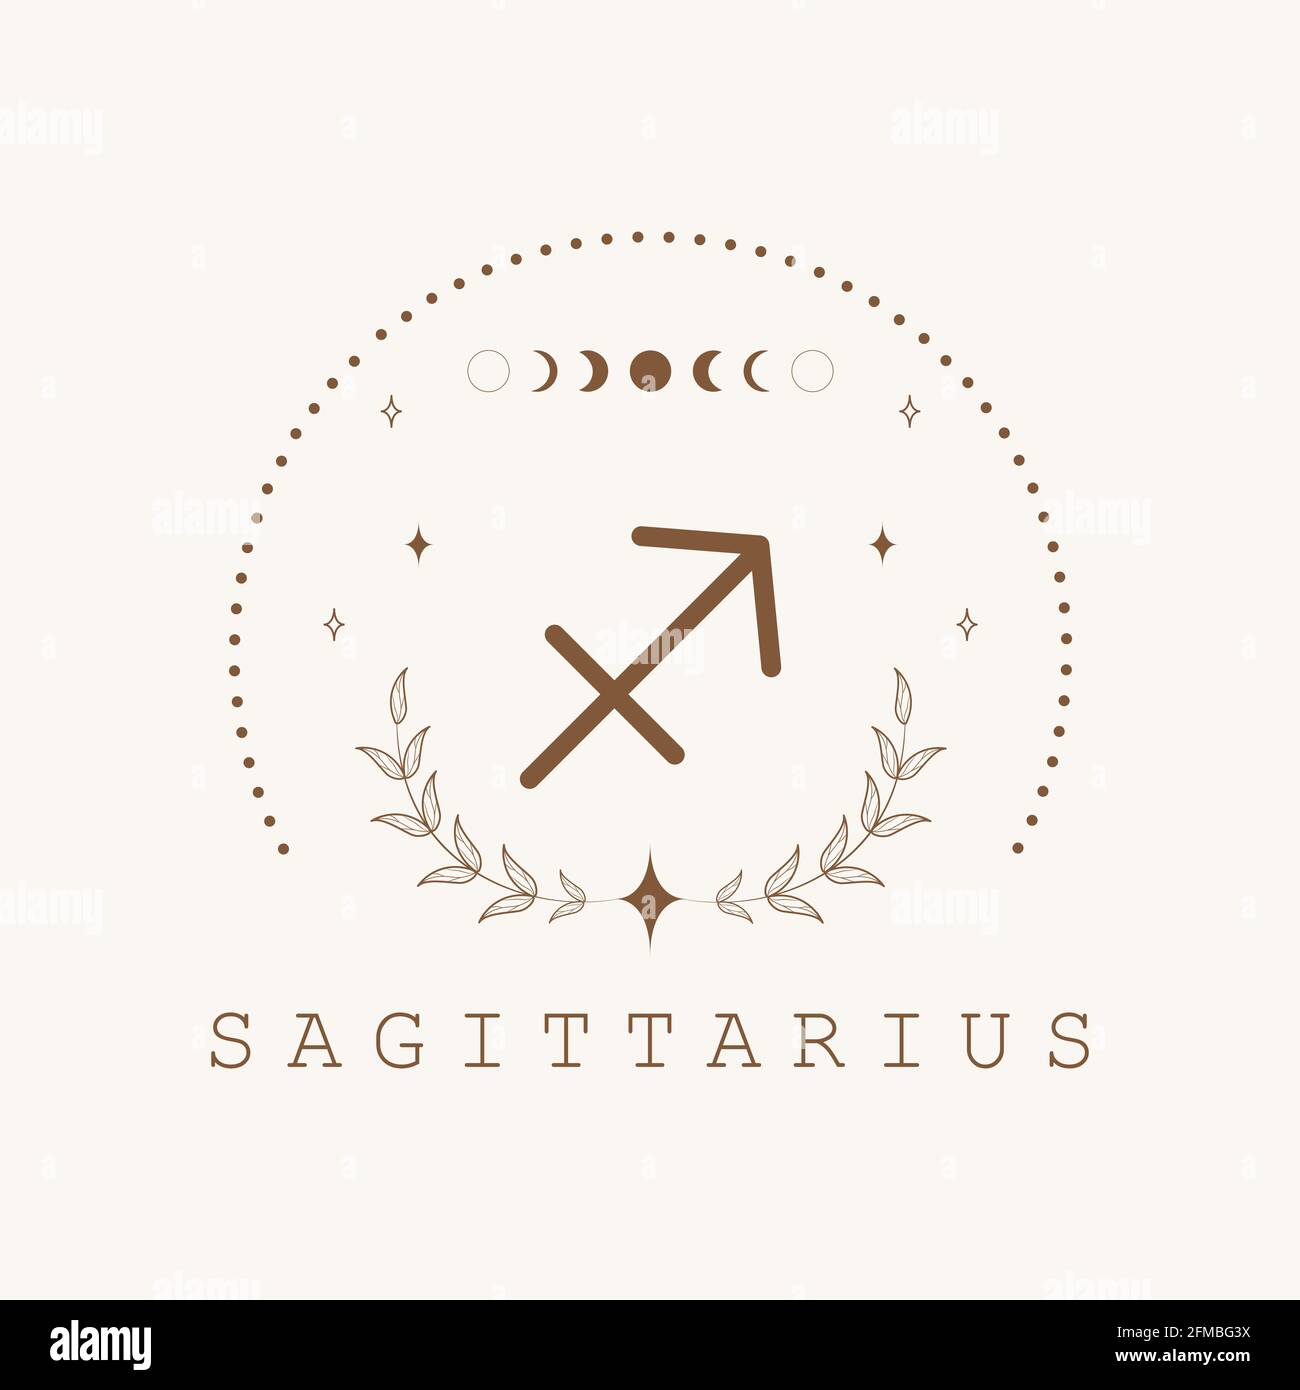 Sagittarius. Zodiac sign in boho style. Astrological icon isolated on ...